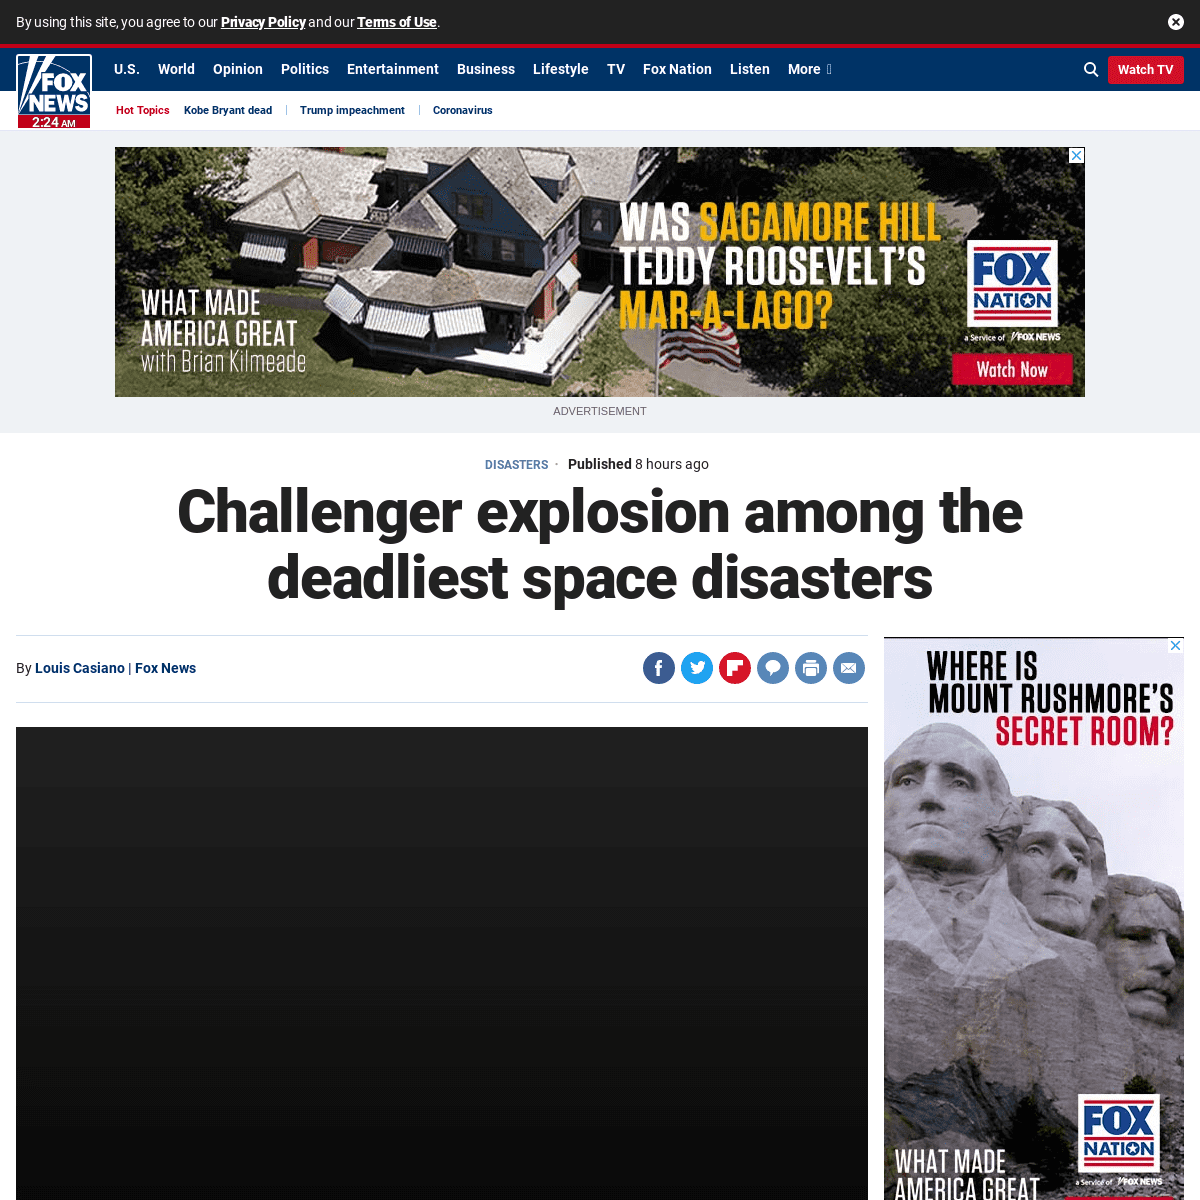 A complete backup of www.foxnews.com/science/challenger-explosion-deadliest-space-disasters